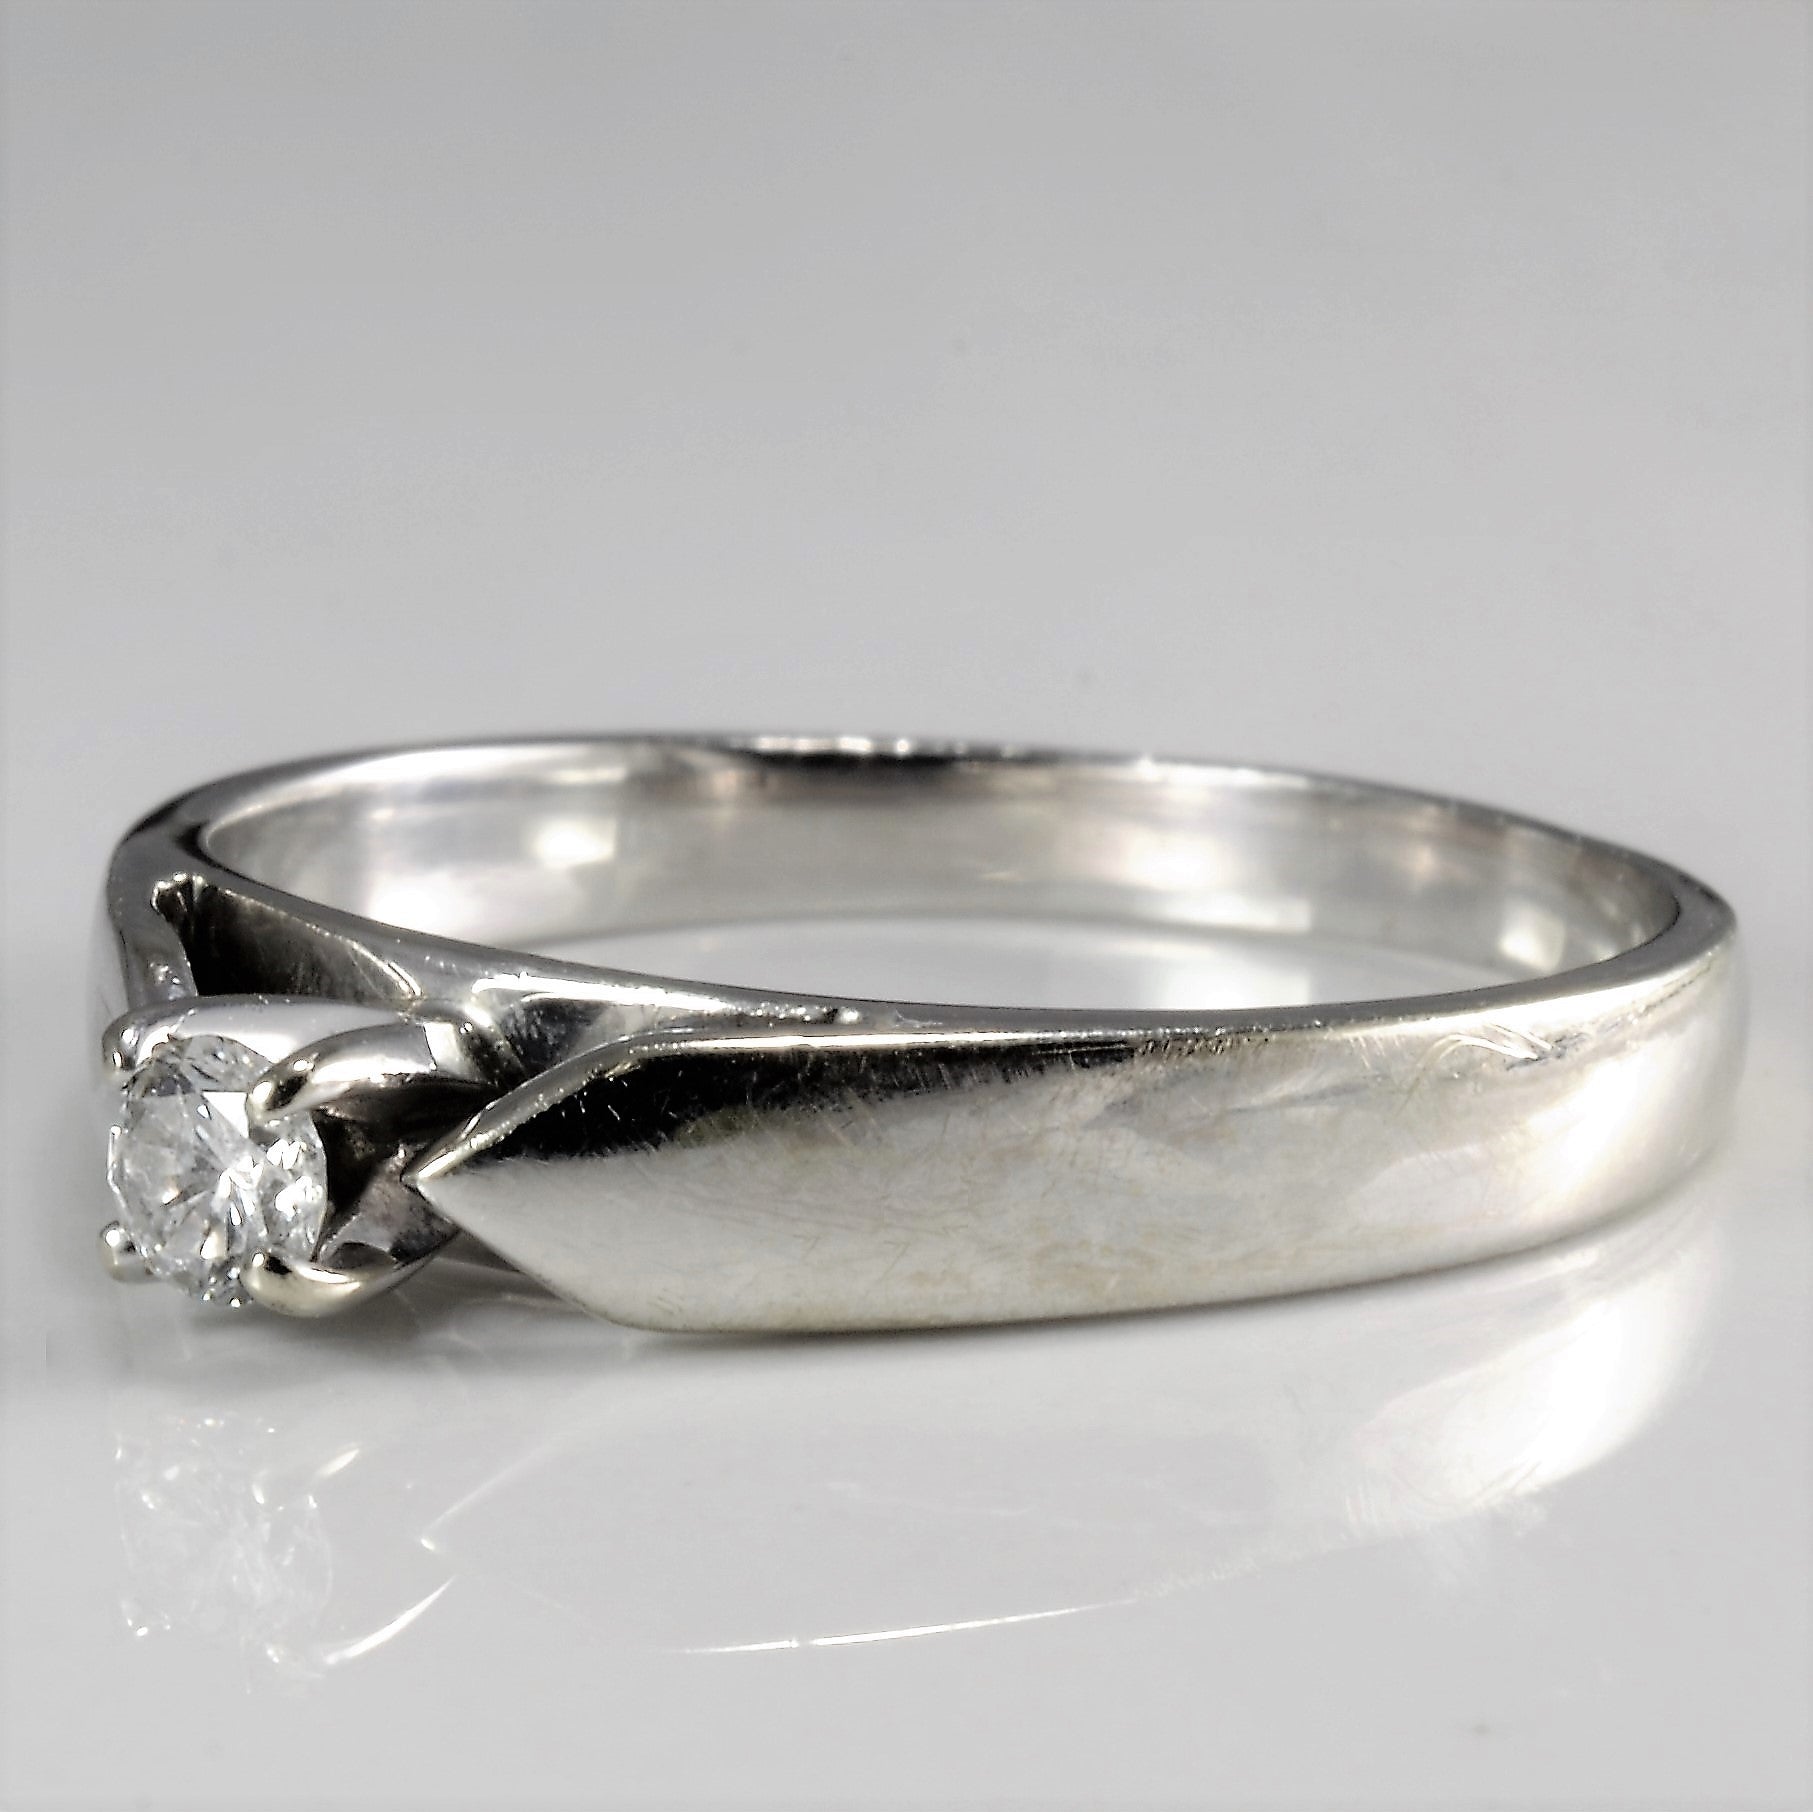 Tapered Solitaire Diamond Ring | 0.10 ct, SZ 7 |